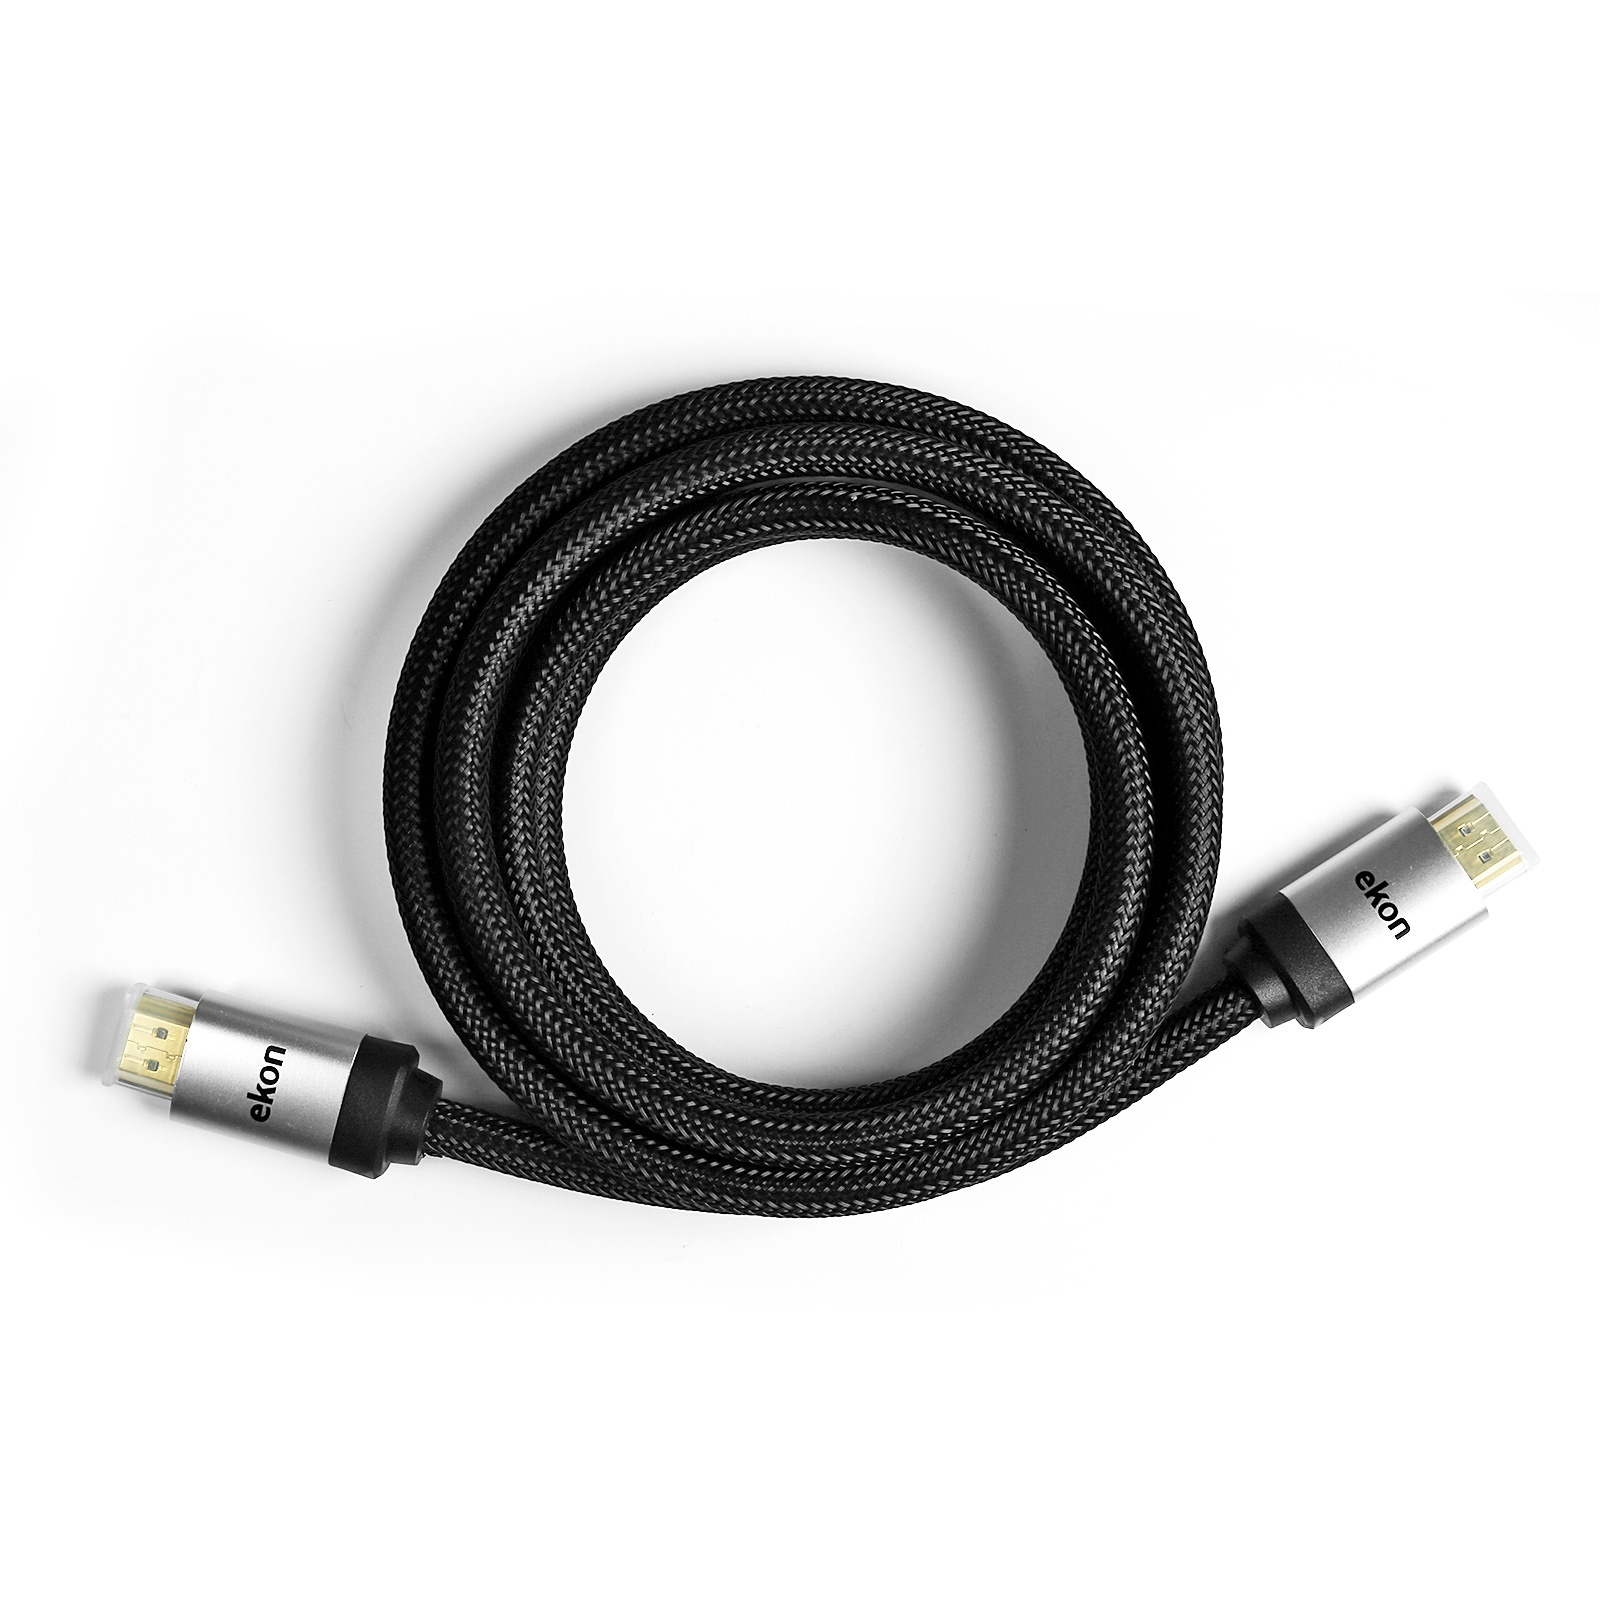 EKON HDMI V 1.4 cable male to female high speed with ethernet. OD 6.0mm.  Conductor pure copper,30 AWG, jacket black color. Connector PVC black  color and gold plated. Shielding: Al-foil with al-mg braid. Total Lenght 3  mt